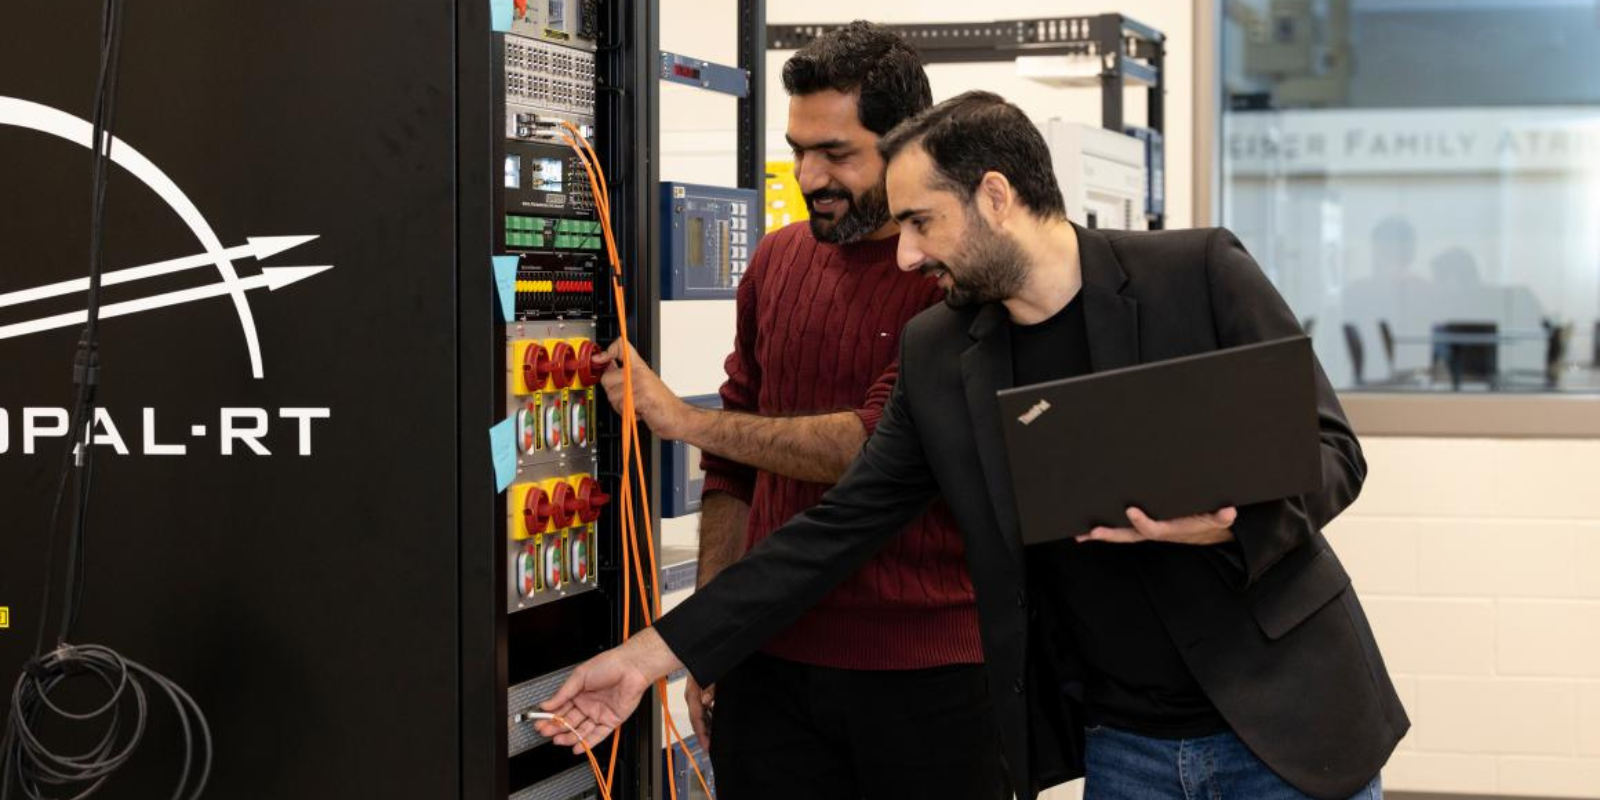 Doctoral students Ali Hassan (left) and Shahid Aziz Khan work with an OPAL-RT "hardware-in-the-loop" simulator in the lab of Electrical and Computer Engineering Professor Wencong Su.